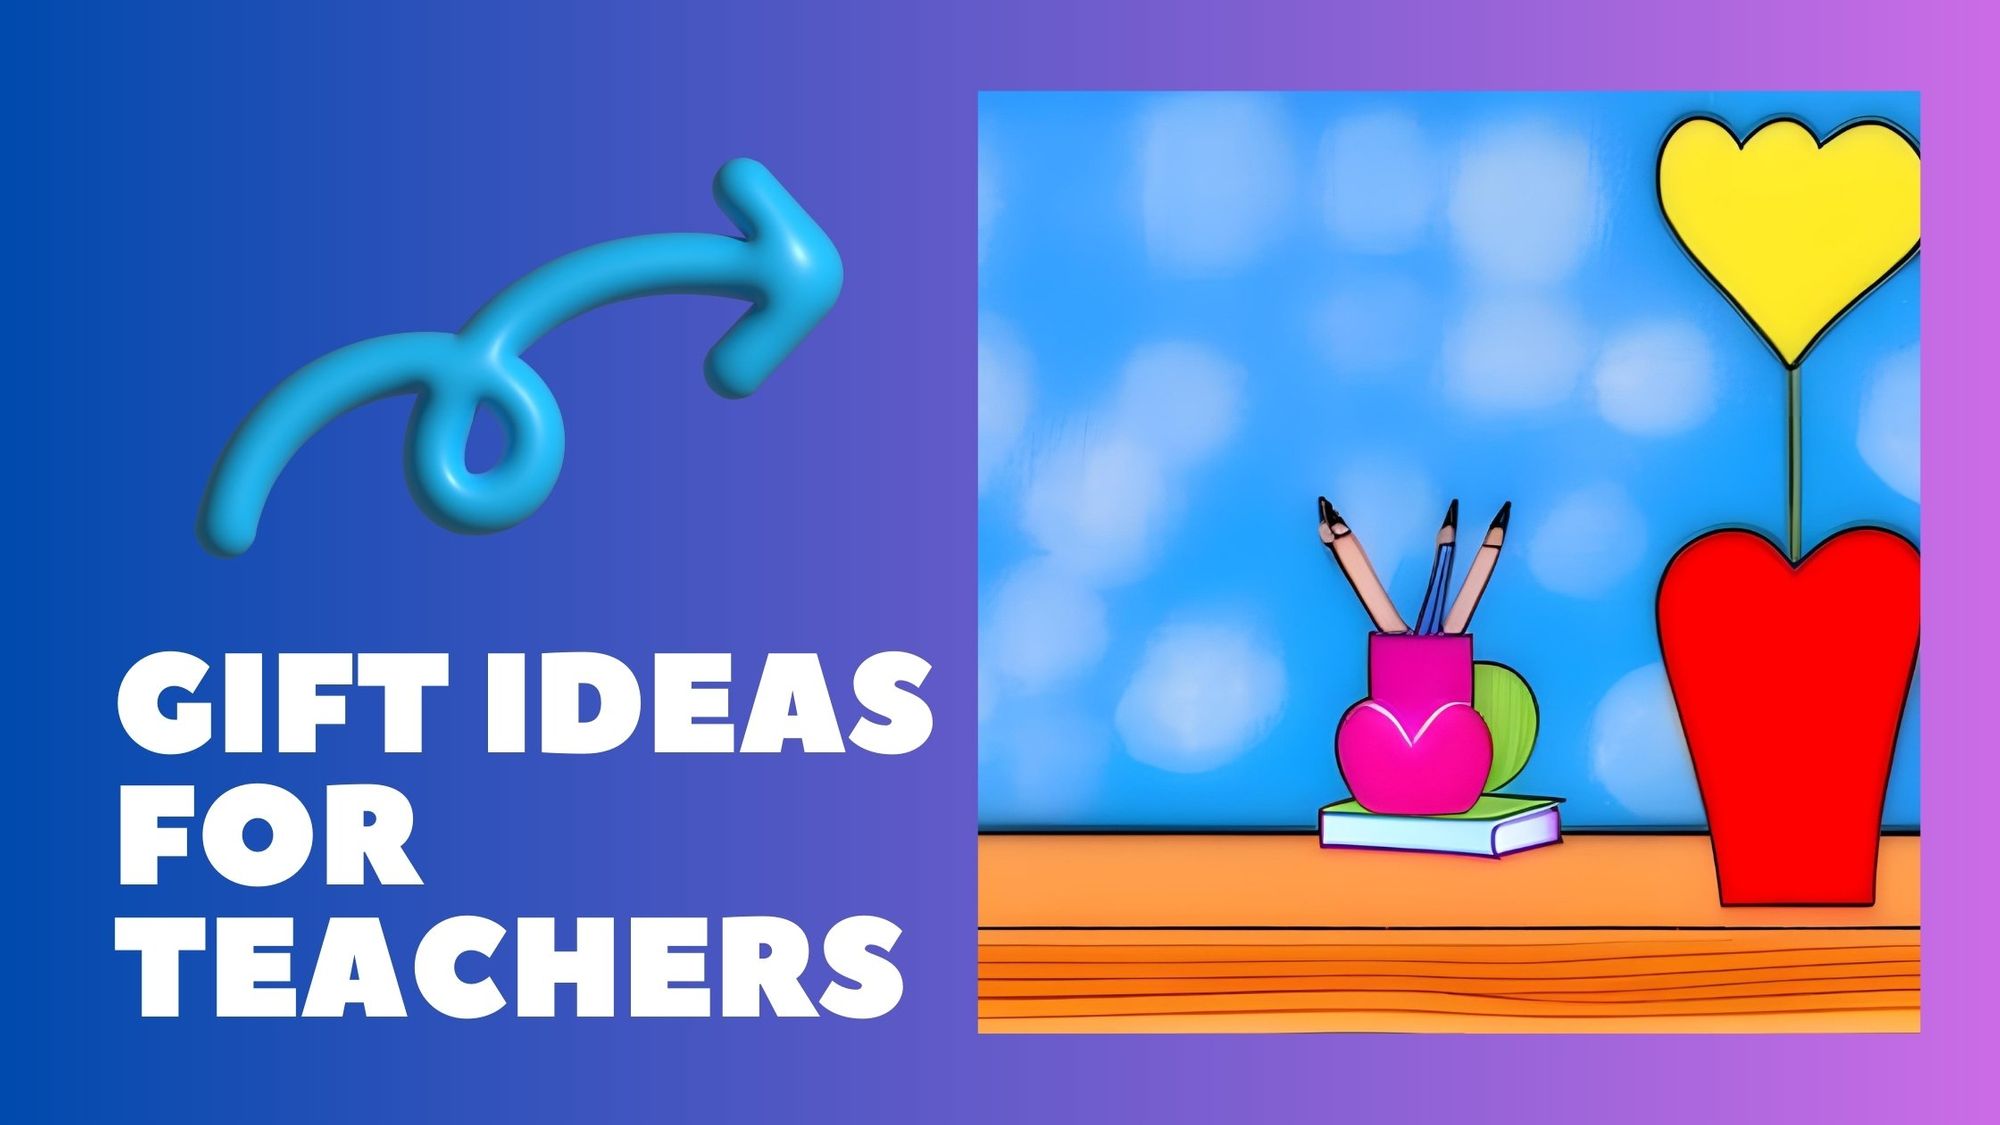 5 best gifts ideas for teachers day